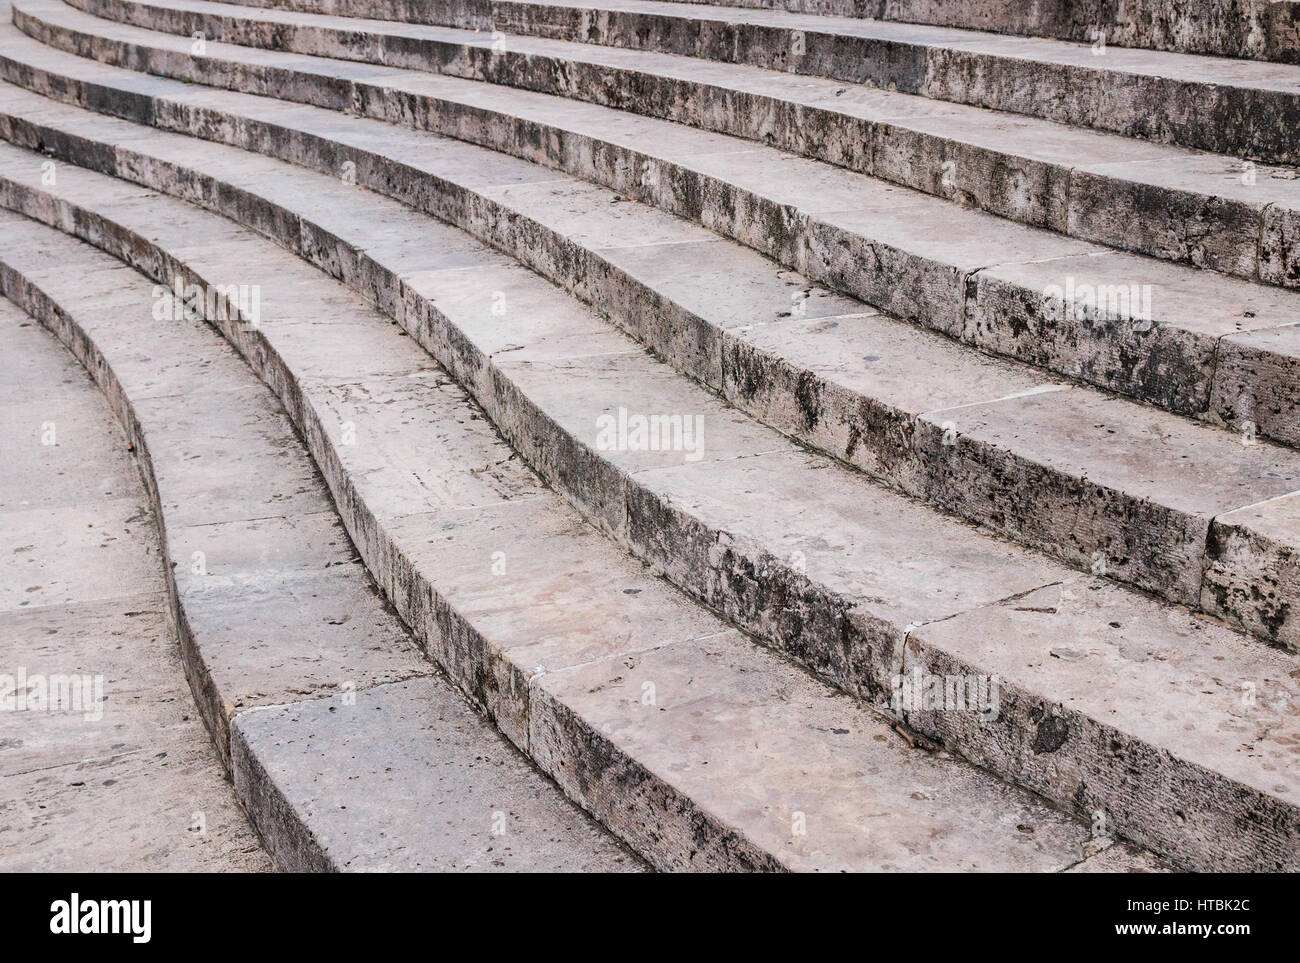 Curved stairs made of grey stone. Stock Photo